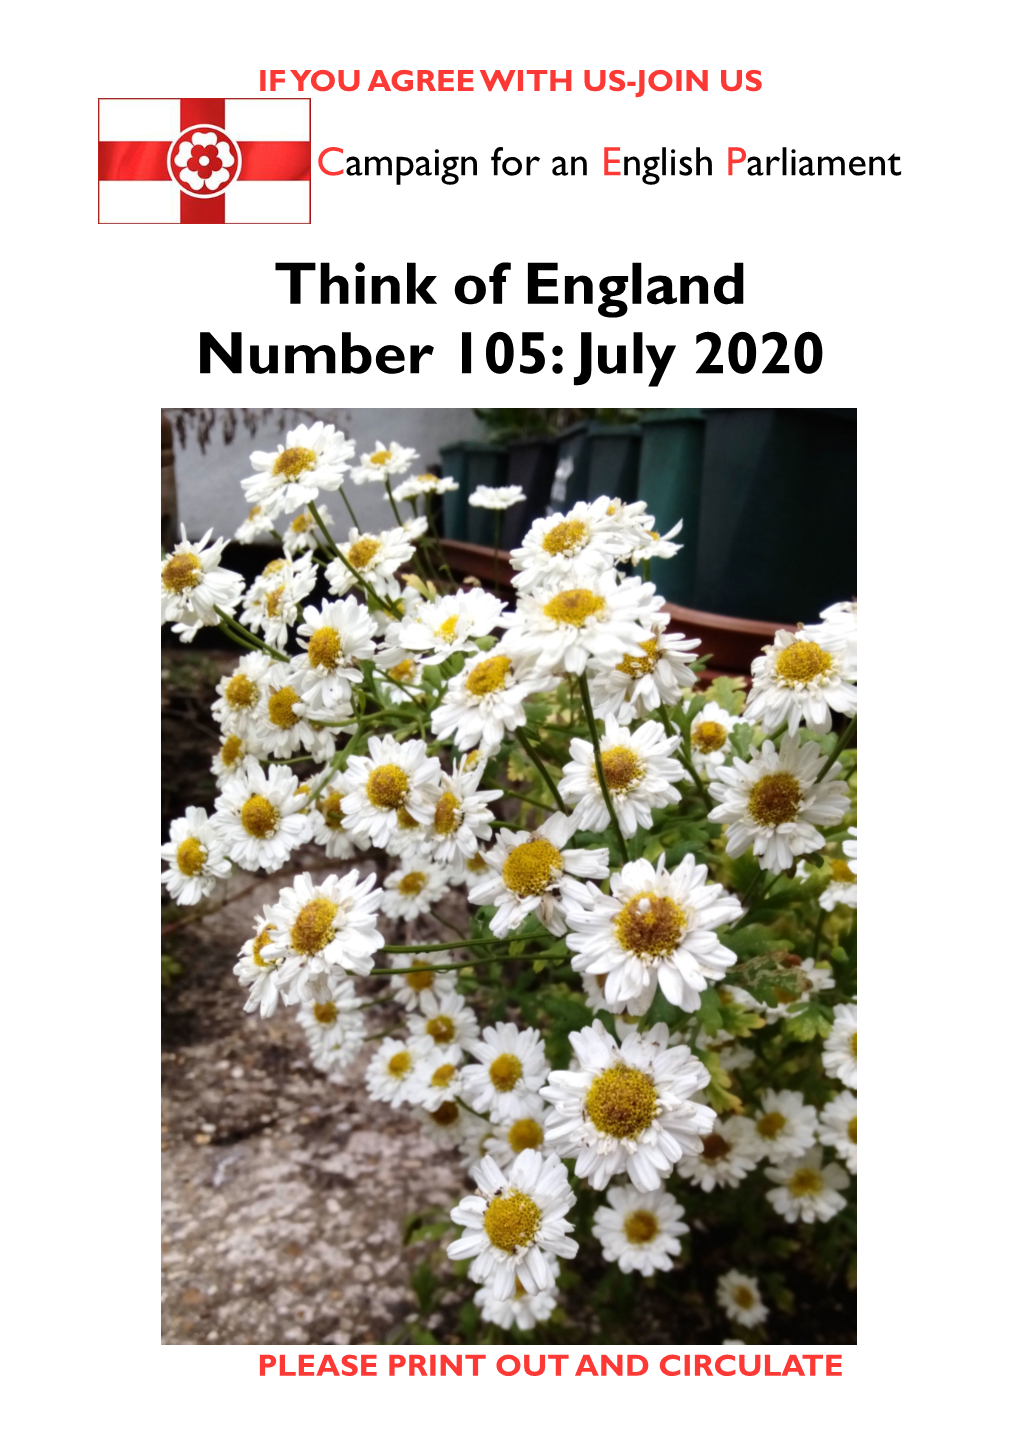 Think of England Number 105: July 2020